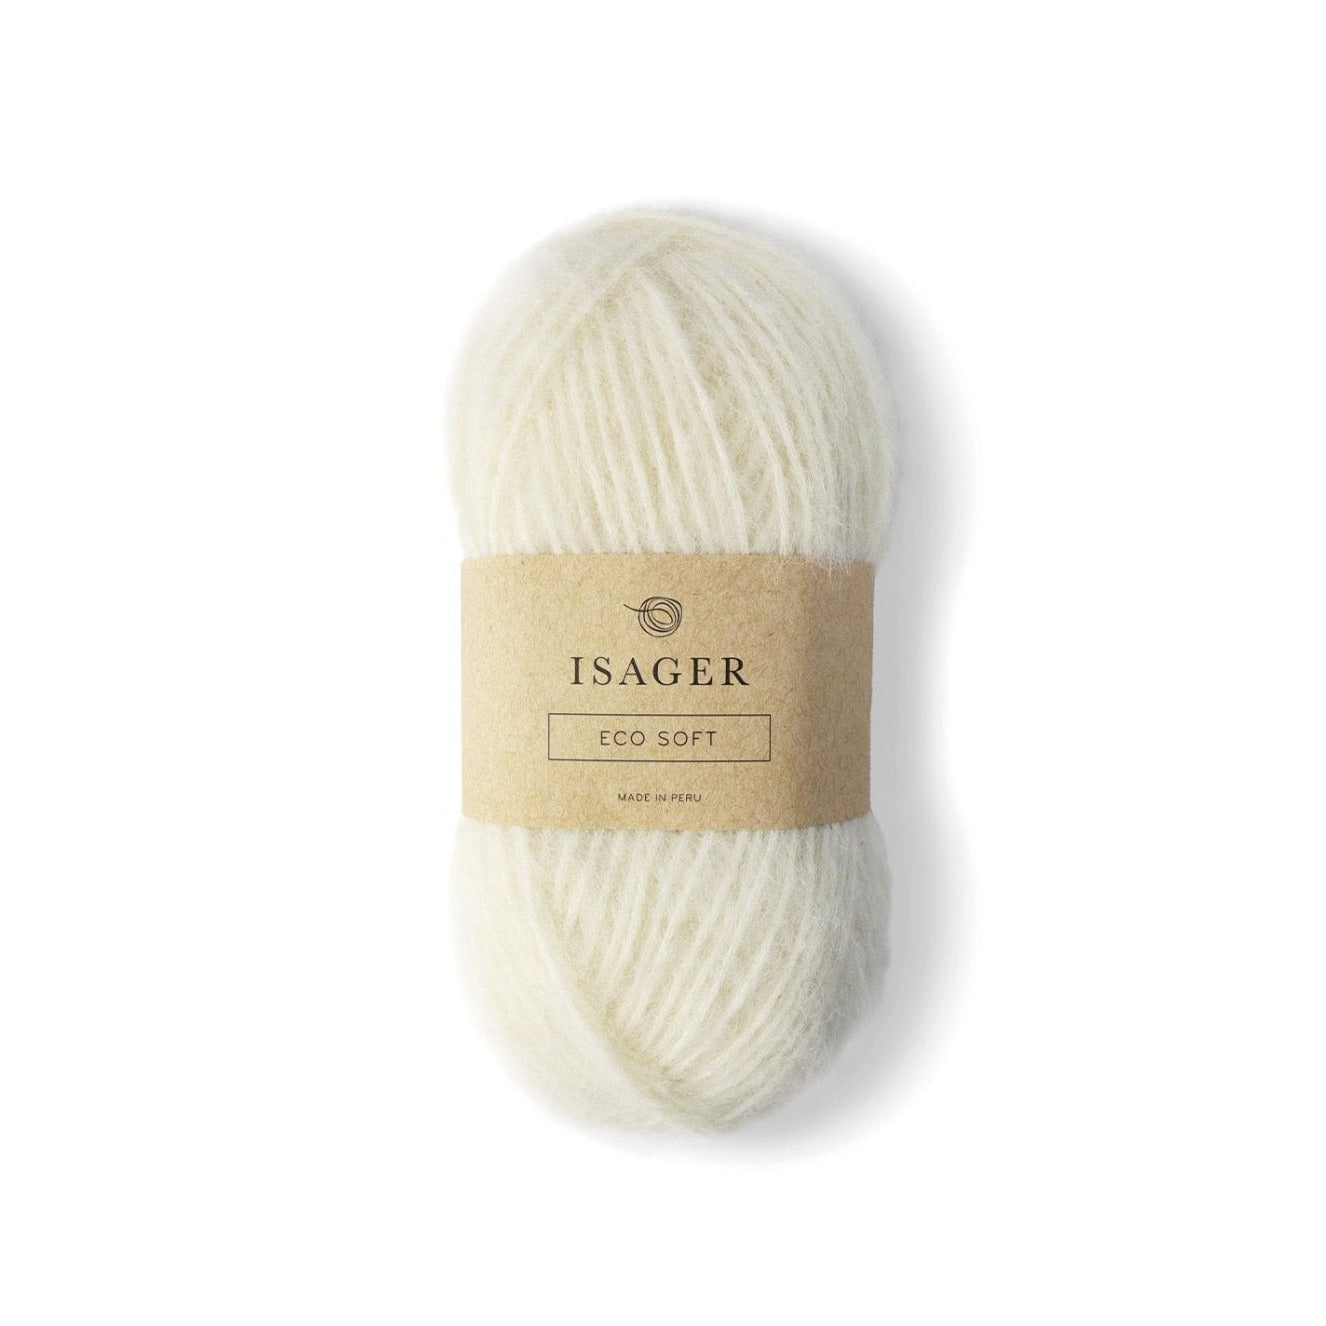 Isager Eco Soft - E0 - 8 Ply - Alpaca - The Little Yarn Store